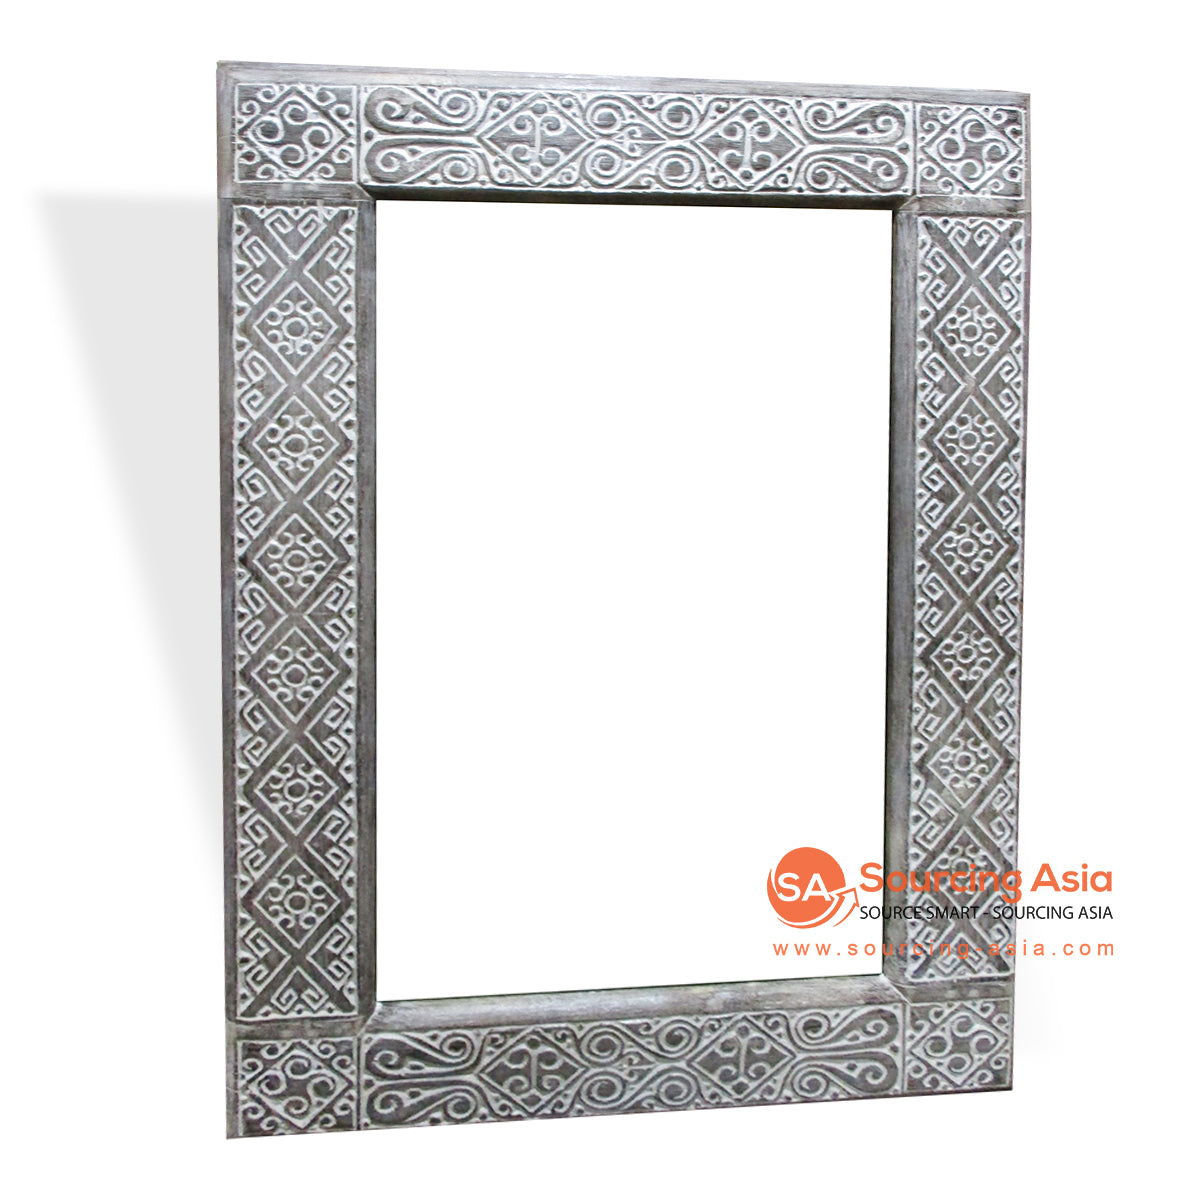 CDA003-3 WHITE WASH WOODEN TRIBAL CARVED RECTANGLE MIRROR